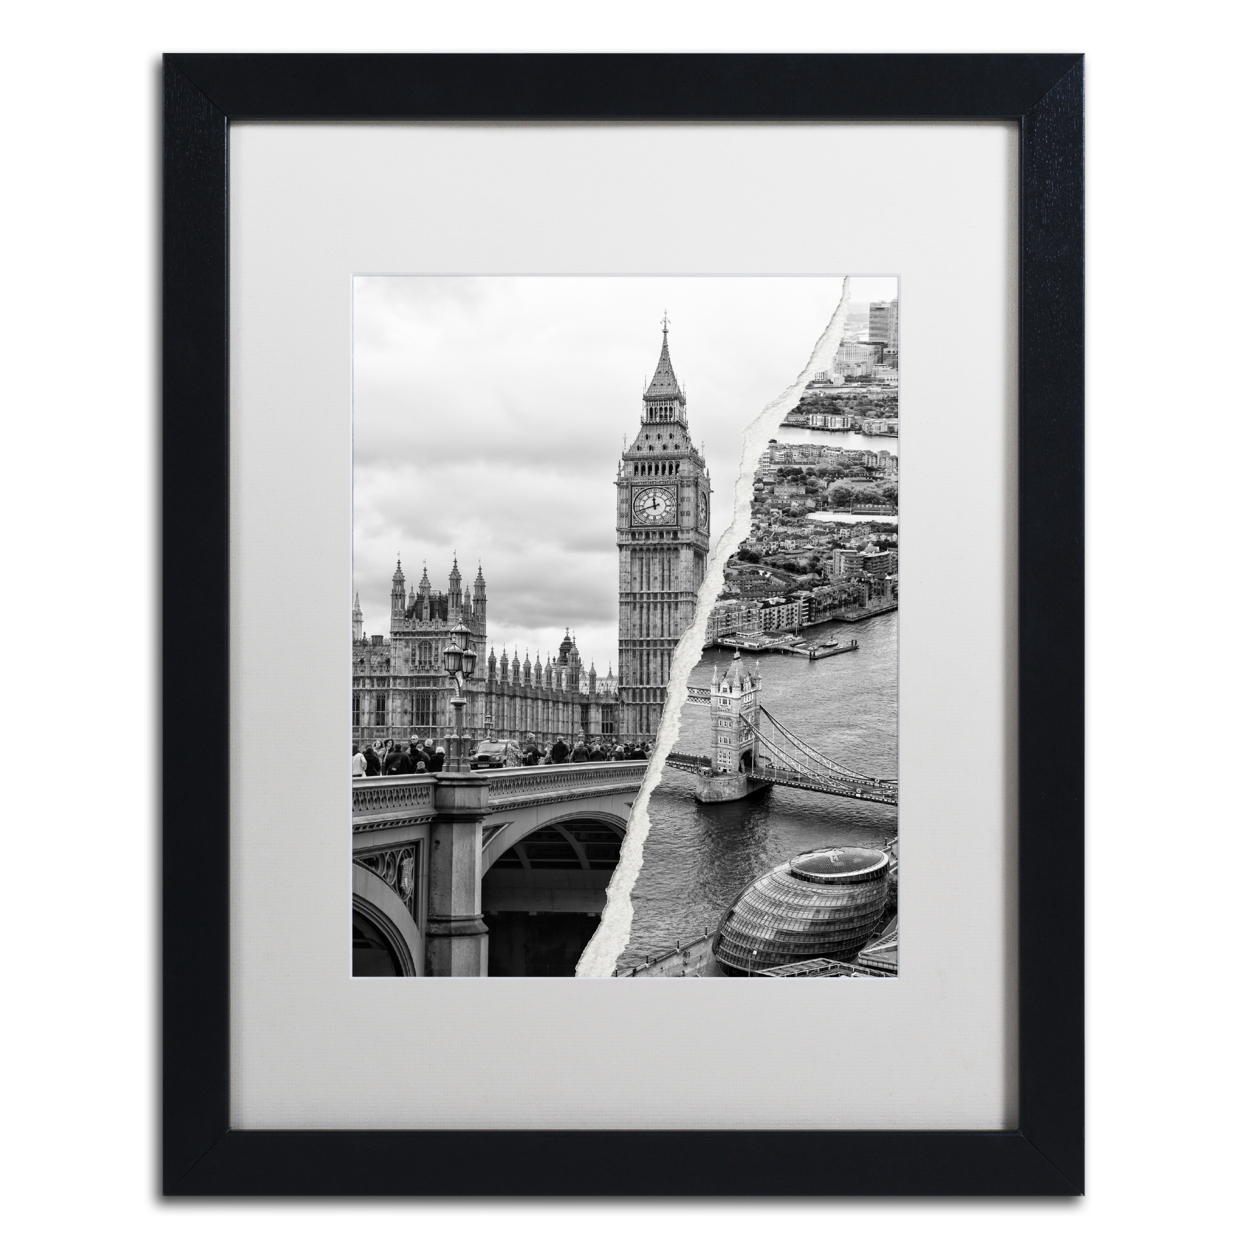 Philippe Hugonnard 'City Of London' Black Wooden Framed Art 18 X 22 Inches